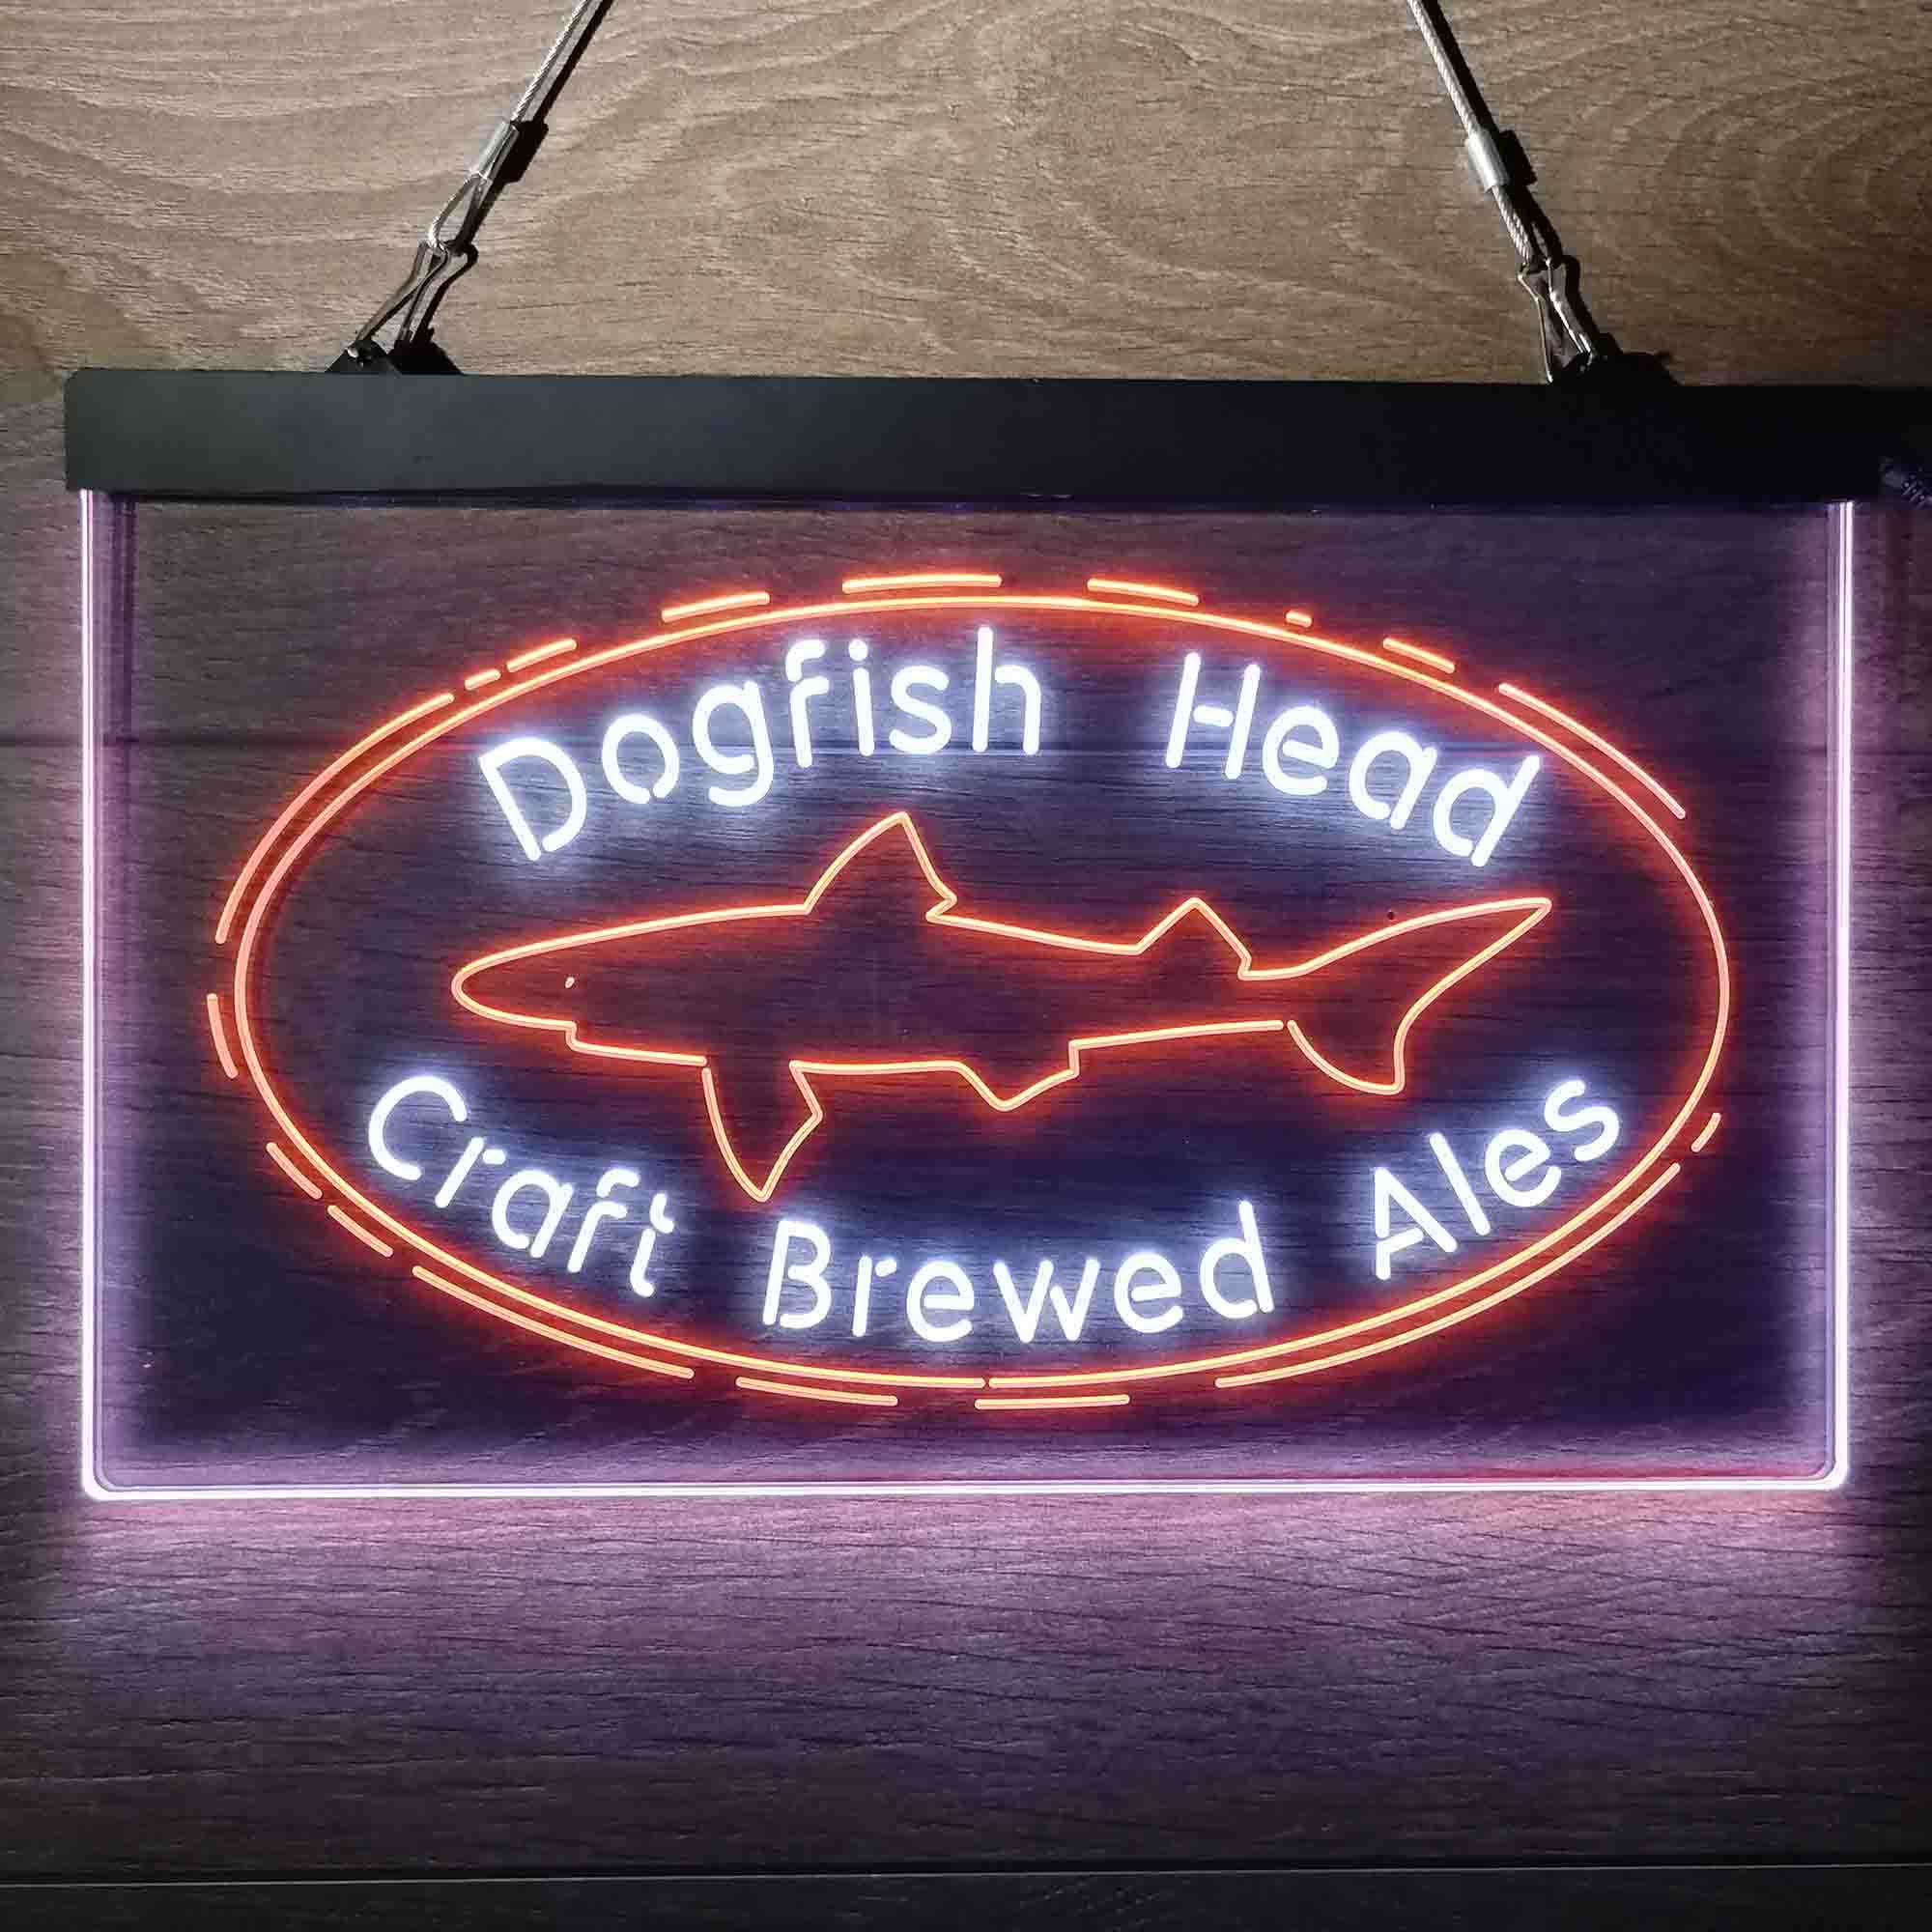 Dogfish Head Craft Brewery Neon-Like LED Sign - ProLedSign